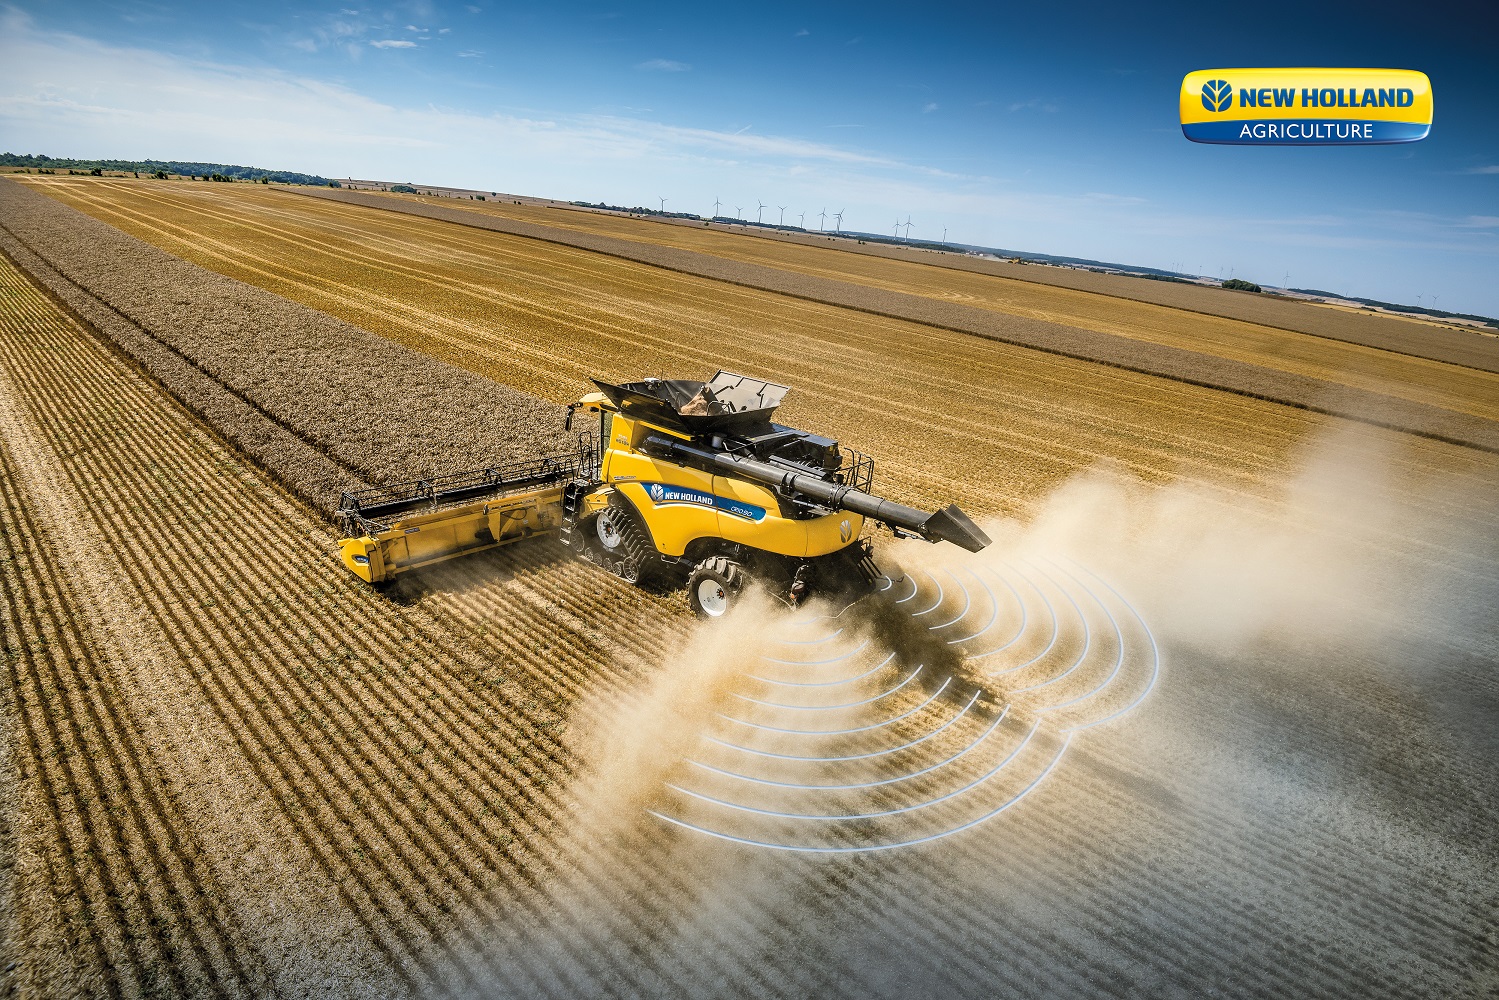 New Holland is awarded Agritechnica 2022 Silver Medal for its